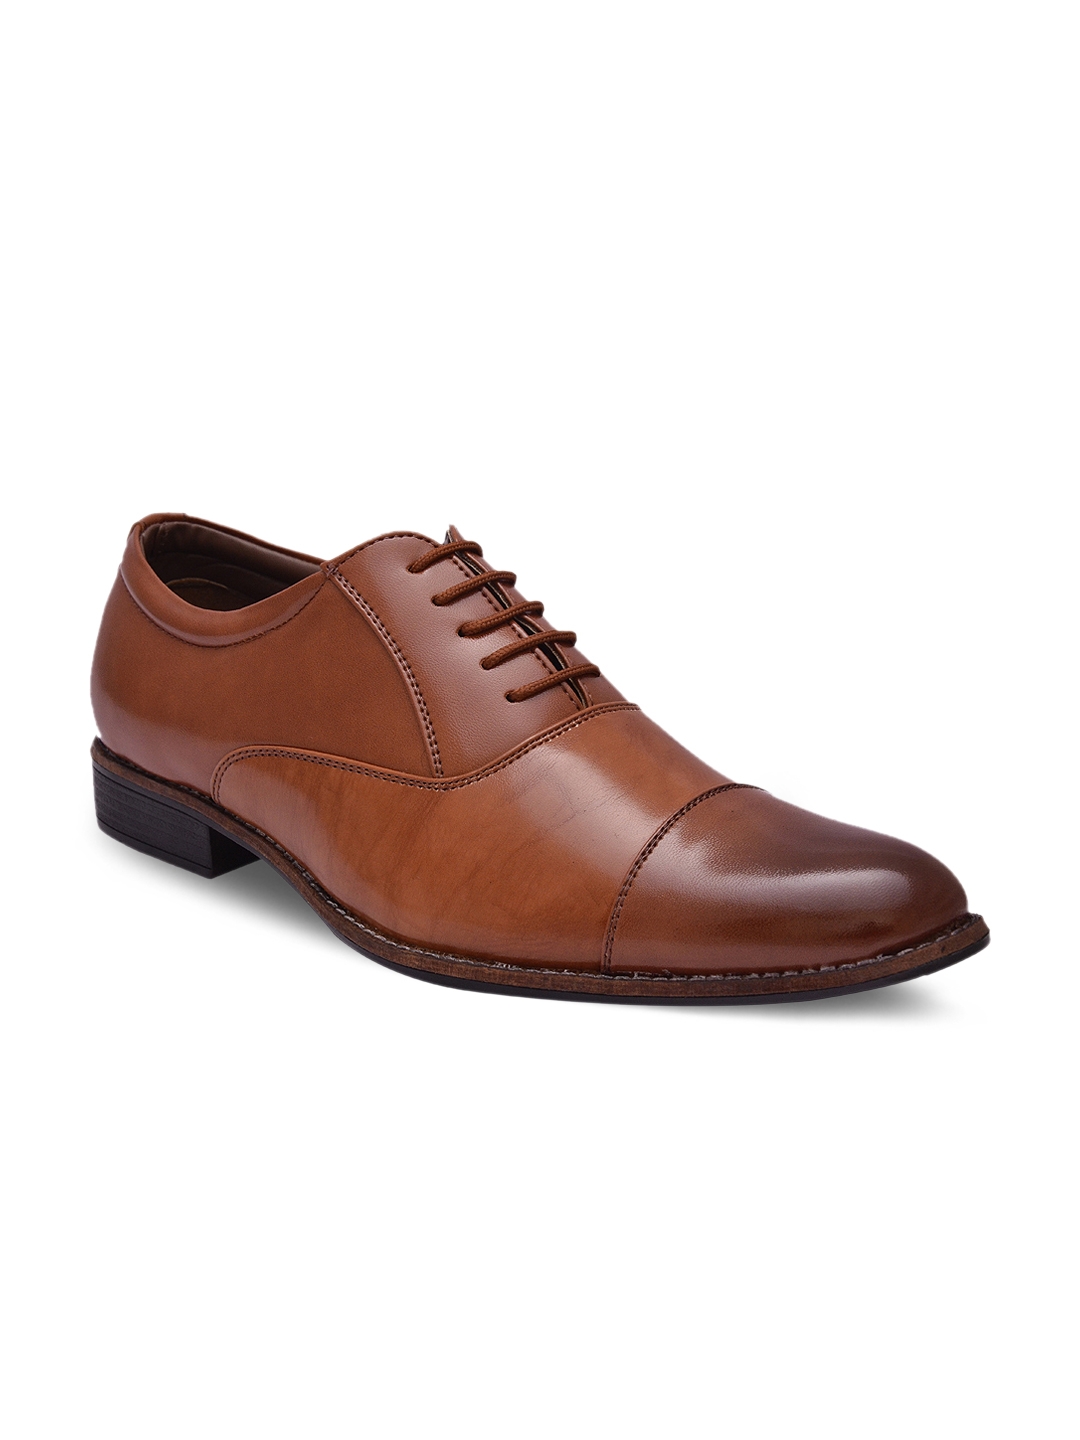 all season formal shoes for mens